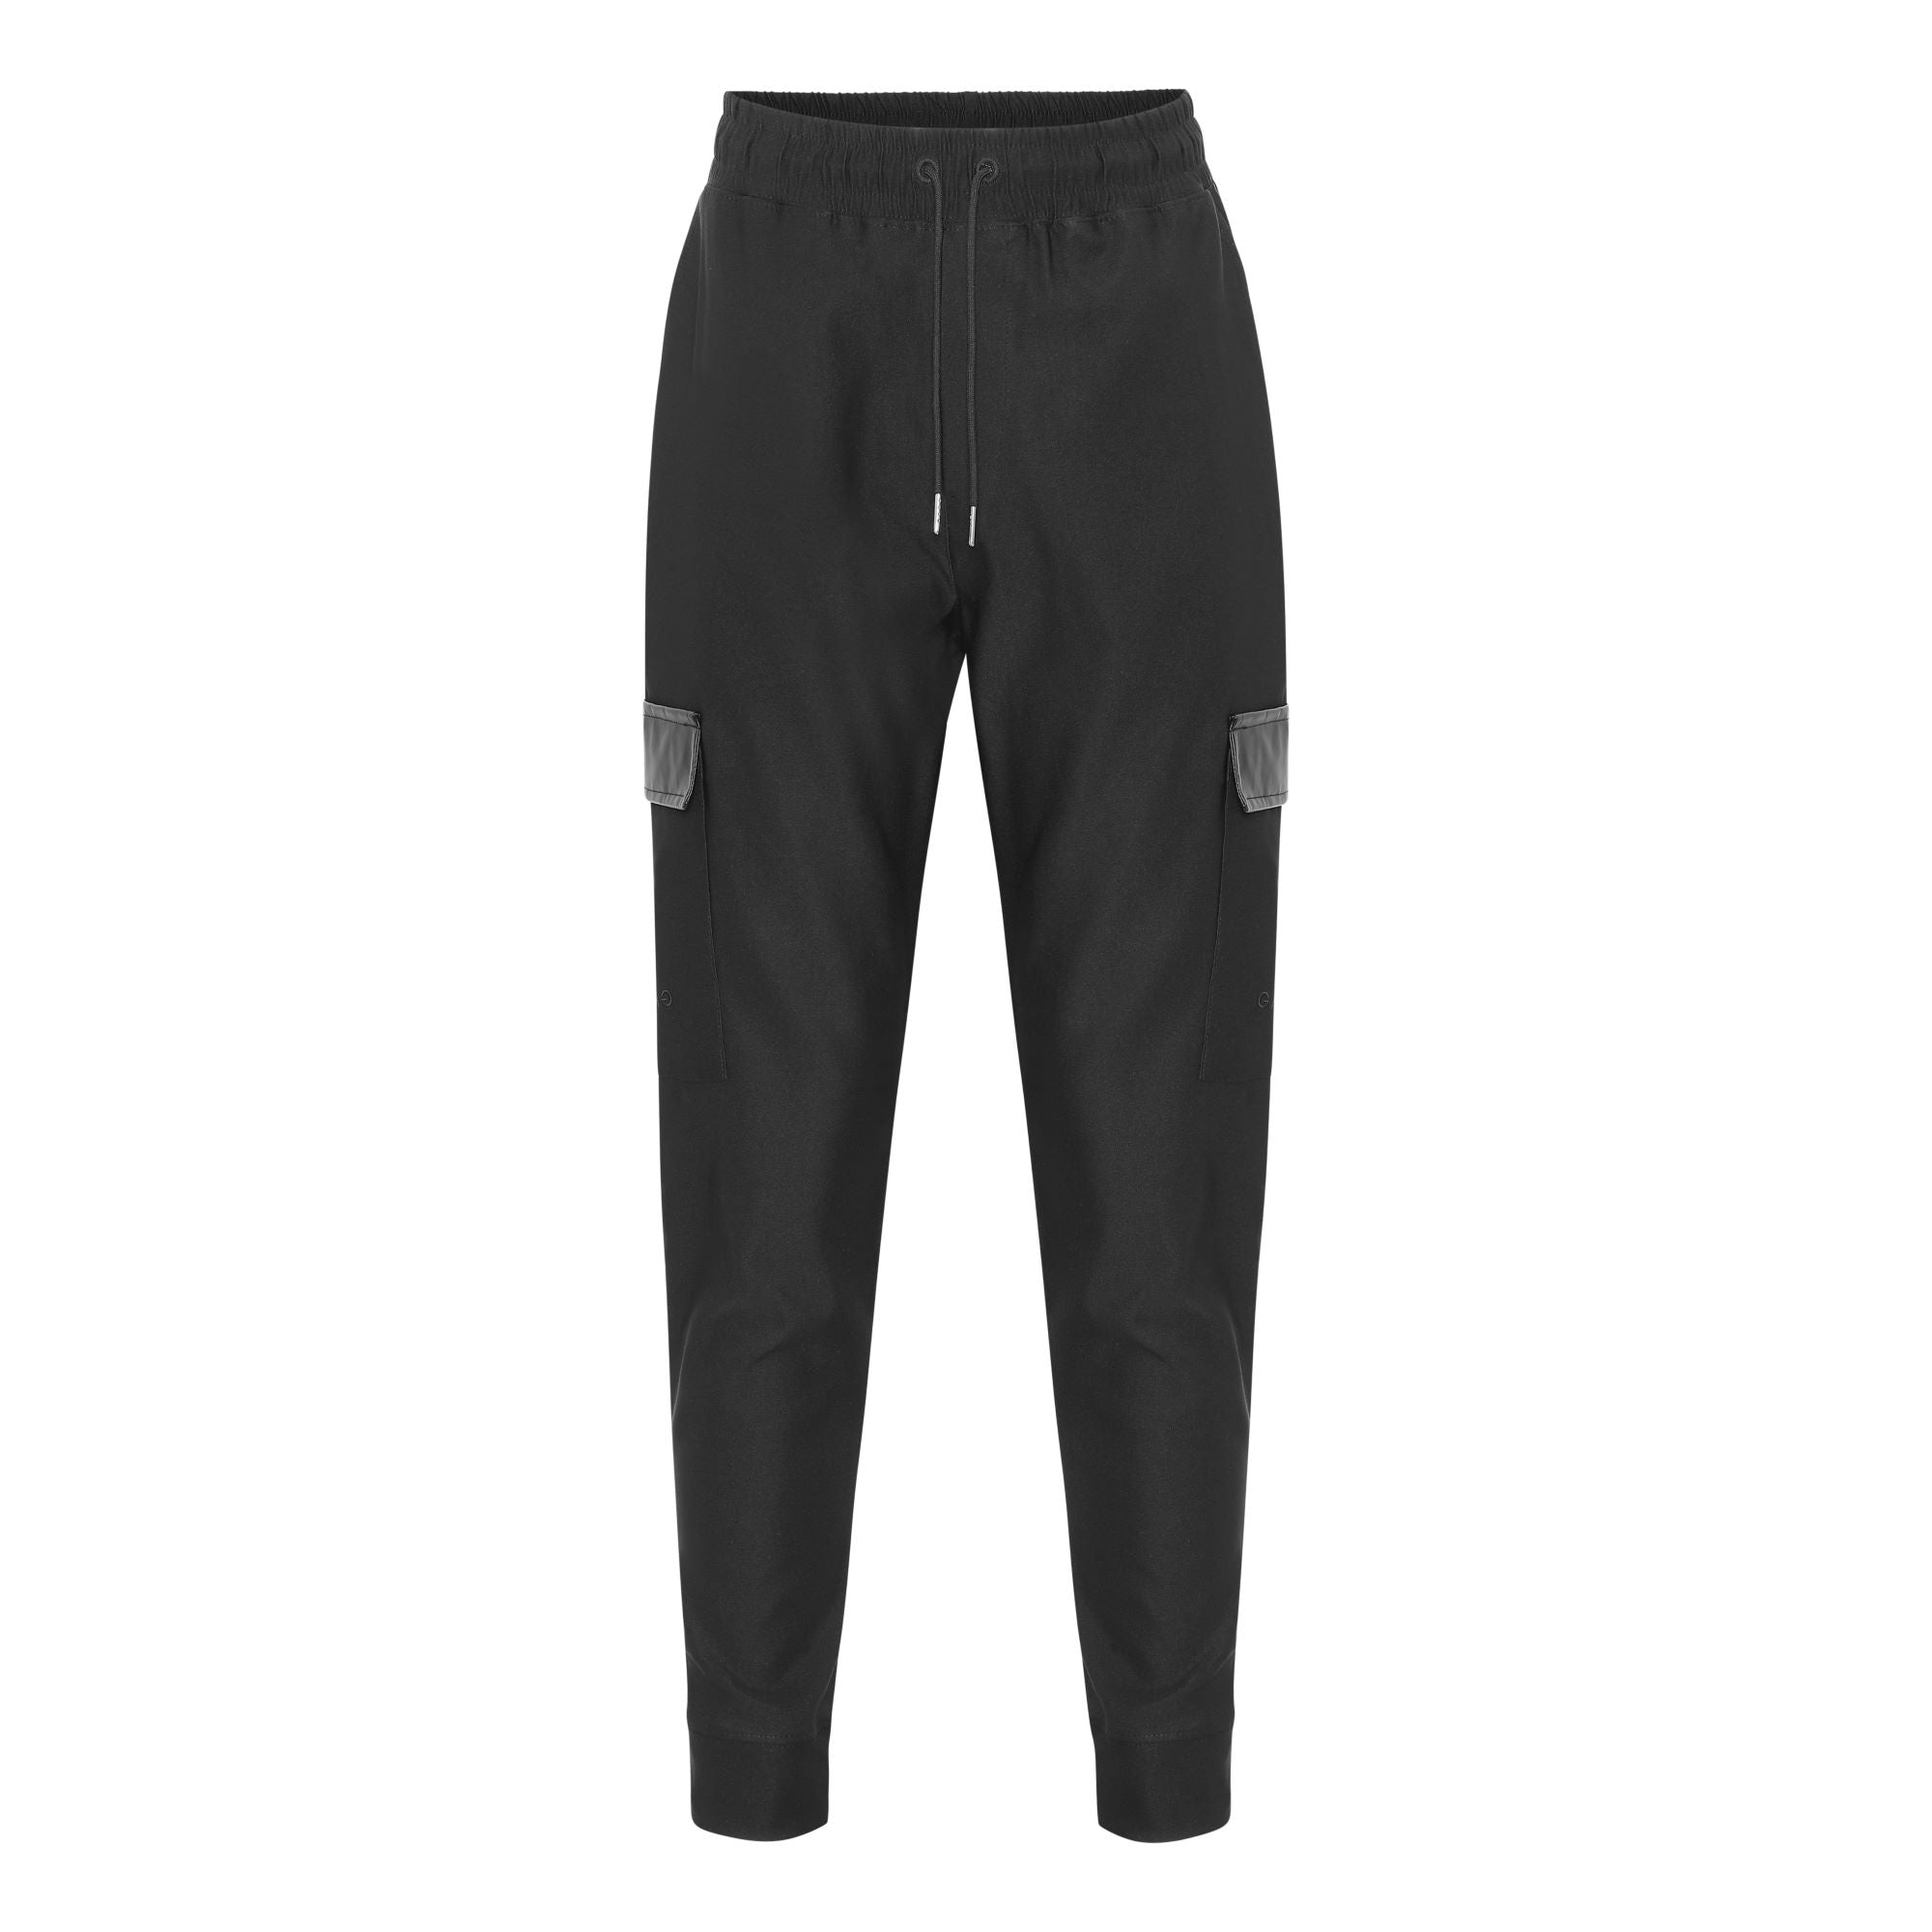 Black stretch cargo pants with vegan leather details